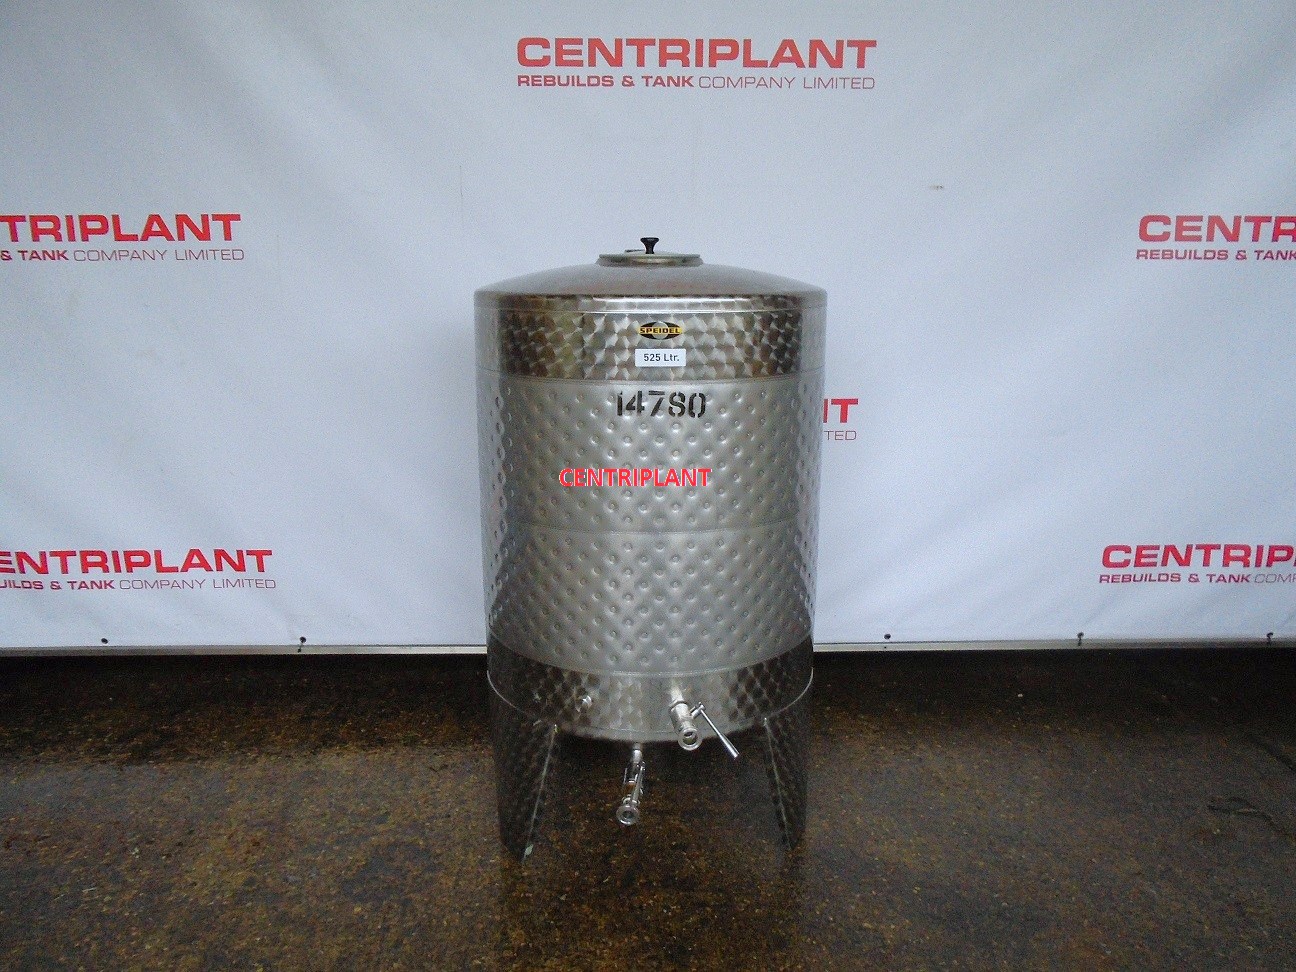 14780 - 525 LITRE STAINLESS STEEL CHILLED JACKETED TANKS